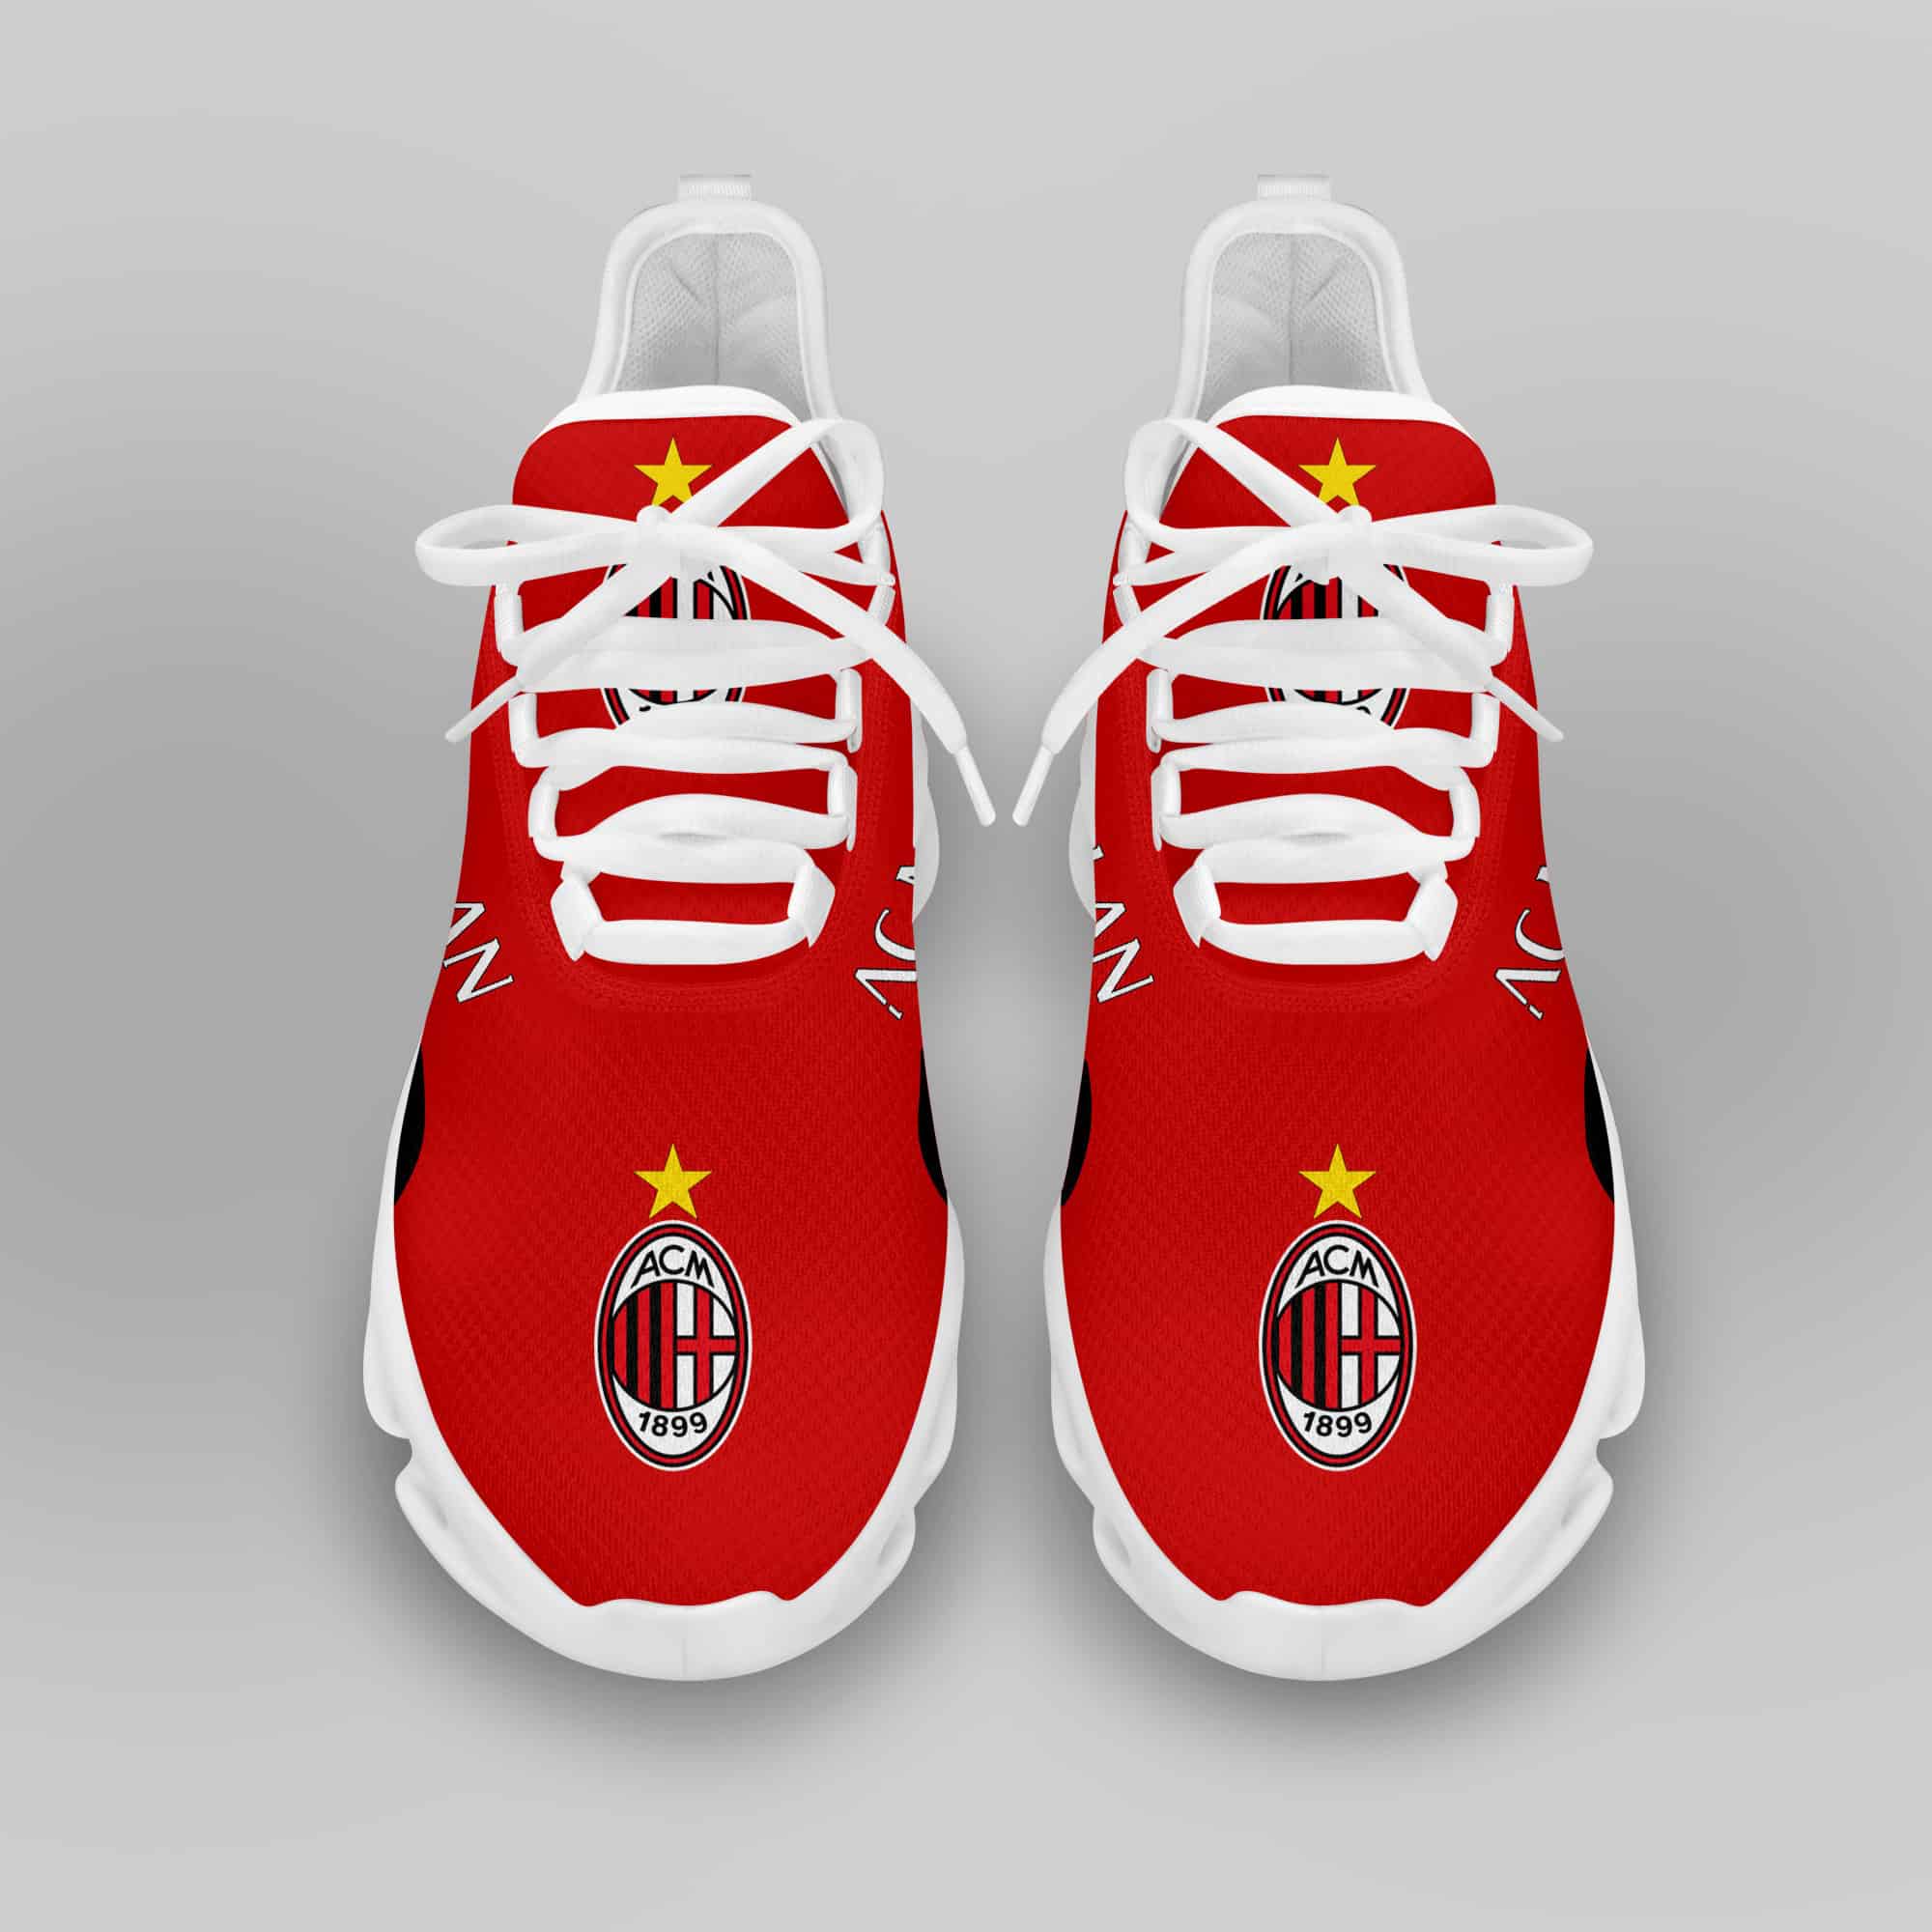 Ac Milan Running Shoes Max Soul Shoes Sneakers Ver 3 3